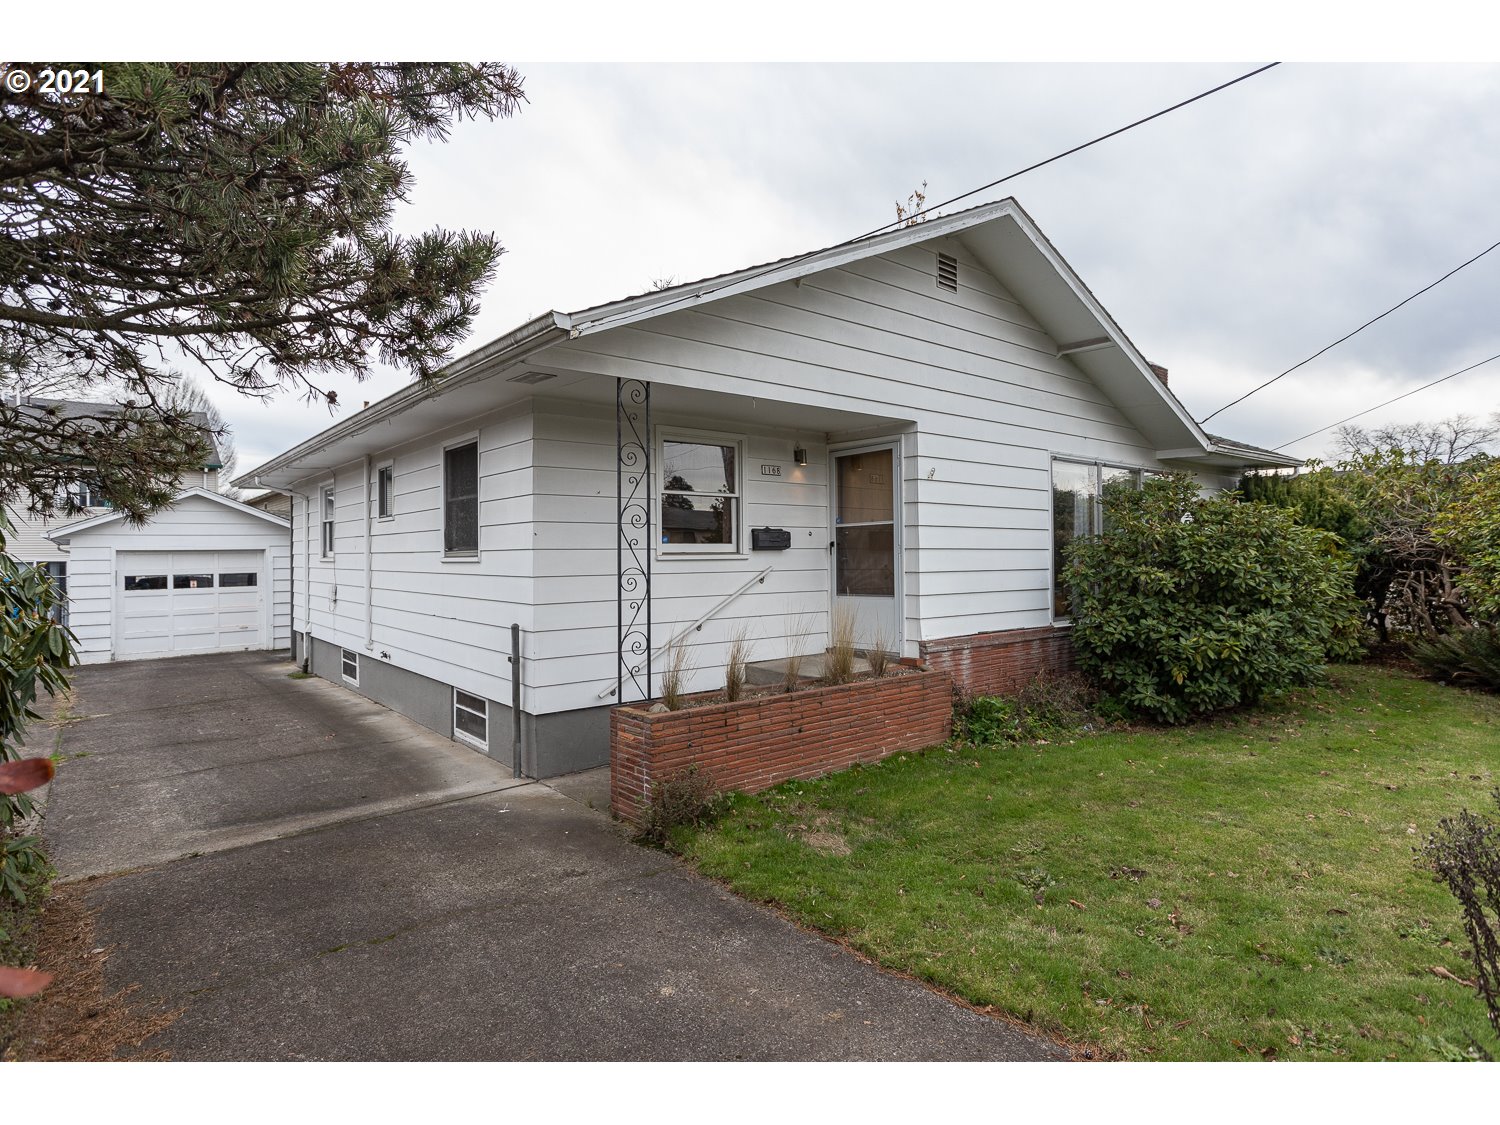 1168 SE 84TH AVE (1 of 32)